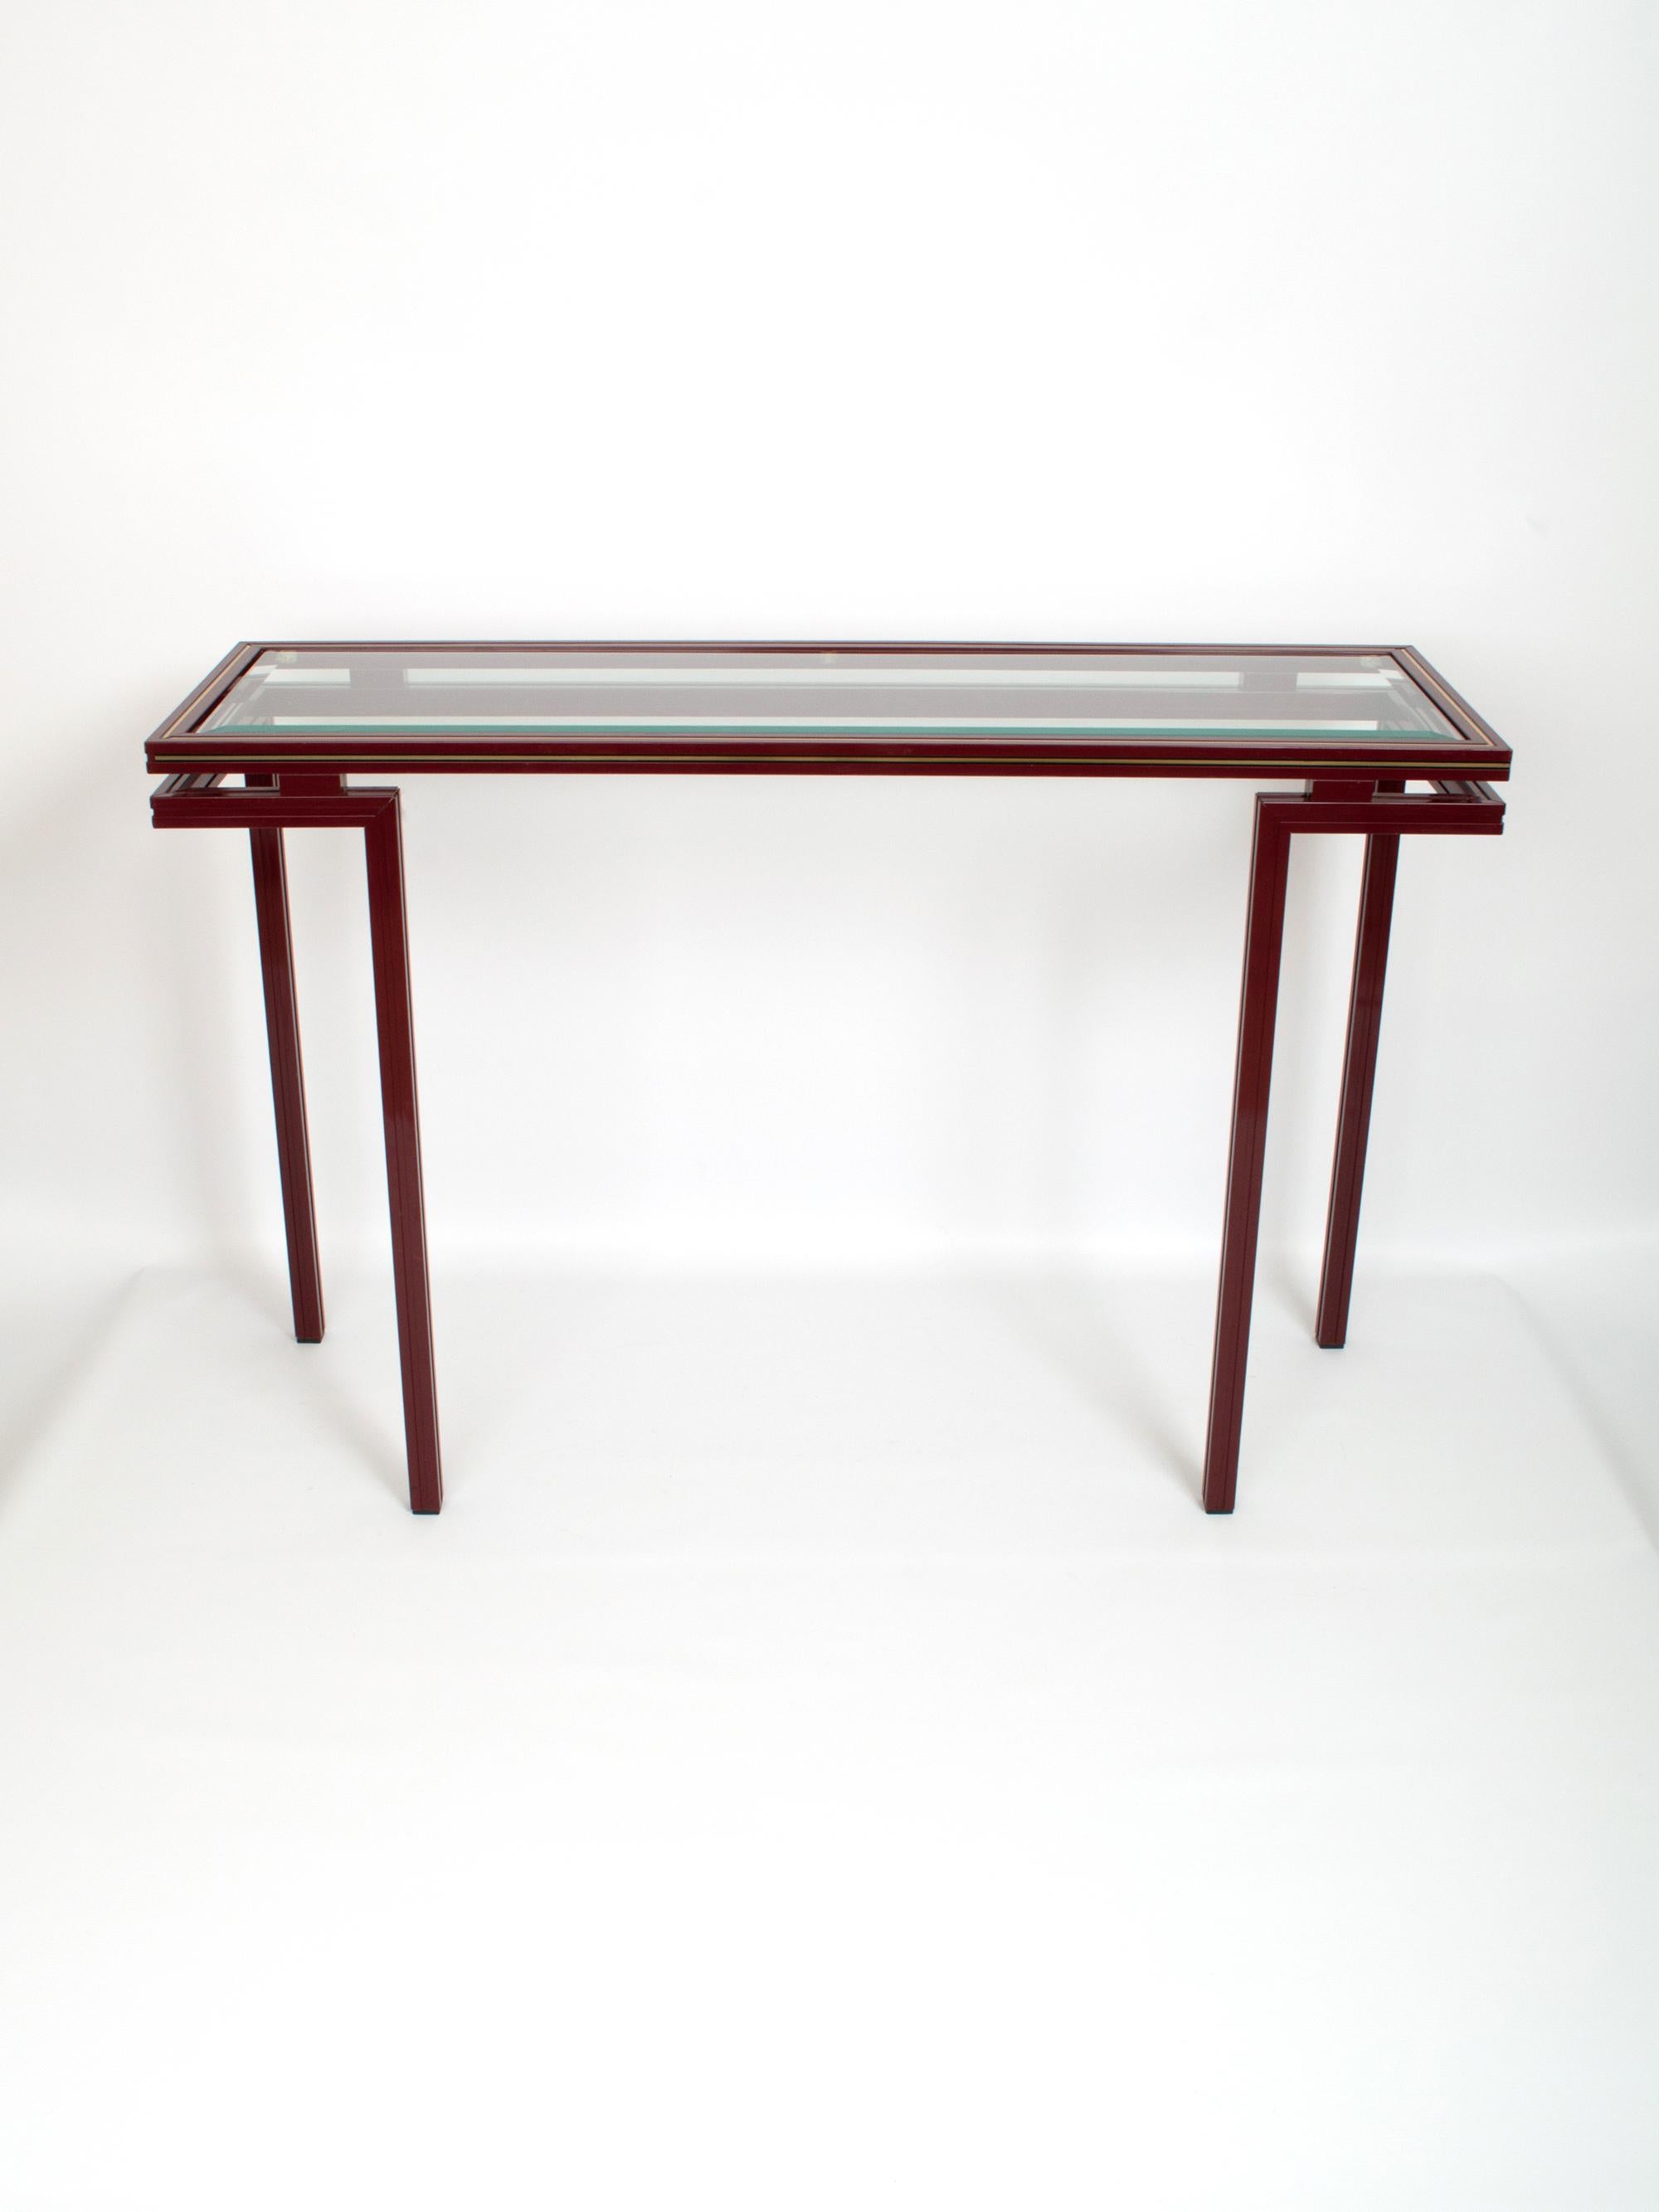 Pierre Vandel Paris console table, France, circa 1970
Decorative console with an asymmetric base made of Bordeaux lacquered aluminium with brass inlay.
In good vintage condition with minimal wear commensurate of age.